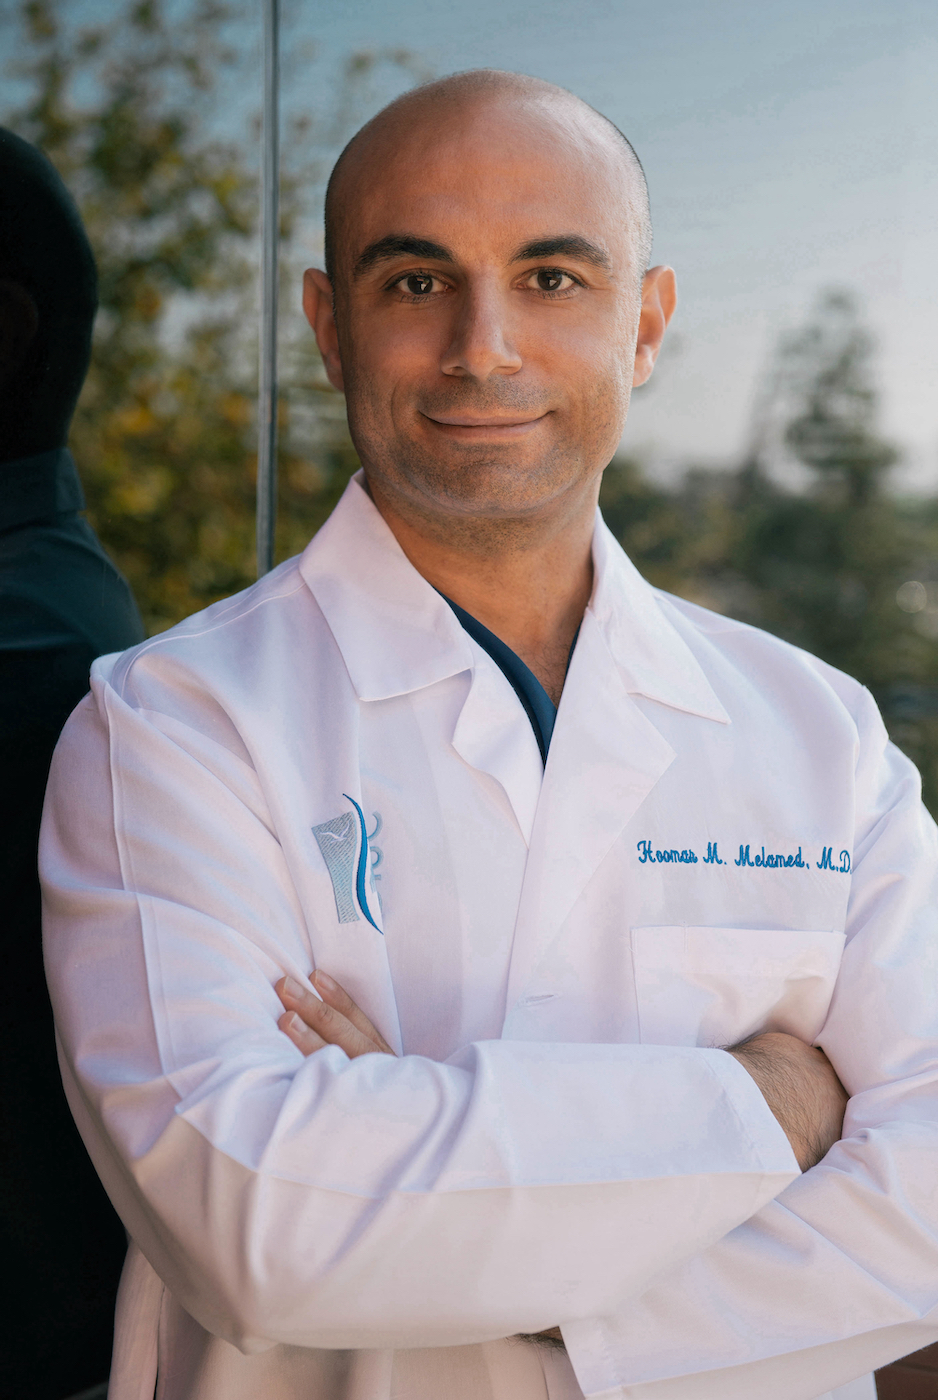 Board-Certified Hooman M. Melamed, MD Known For Surgery as “Last Option”